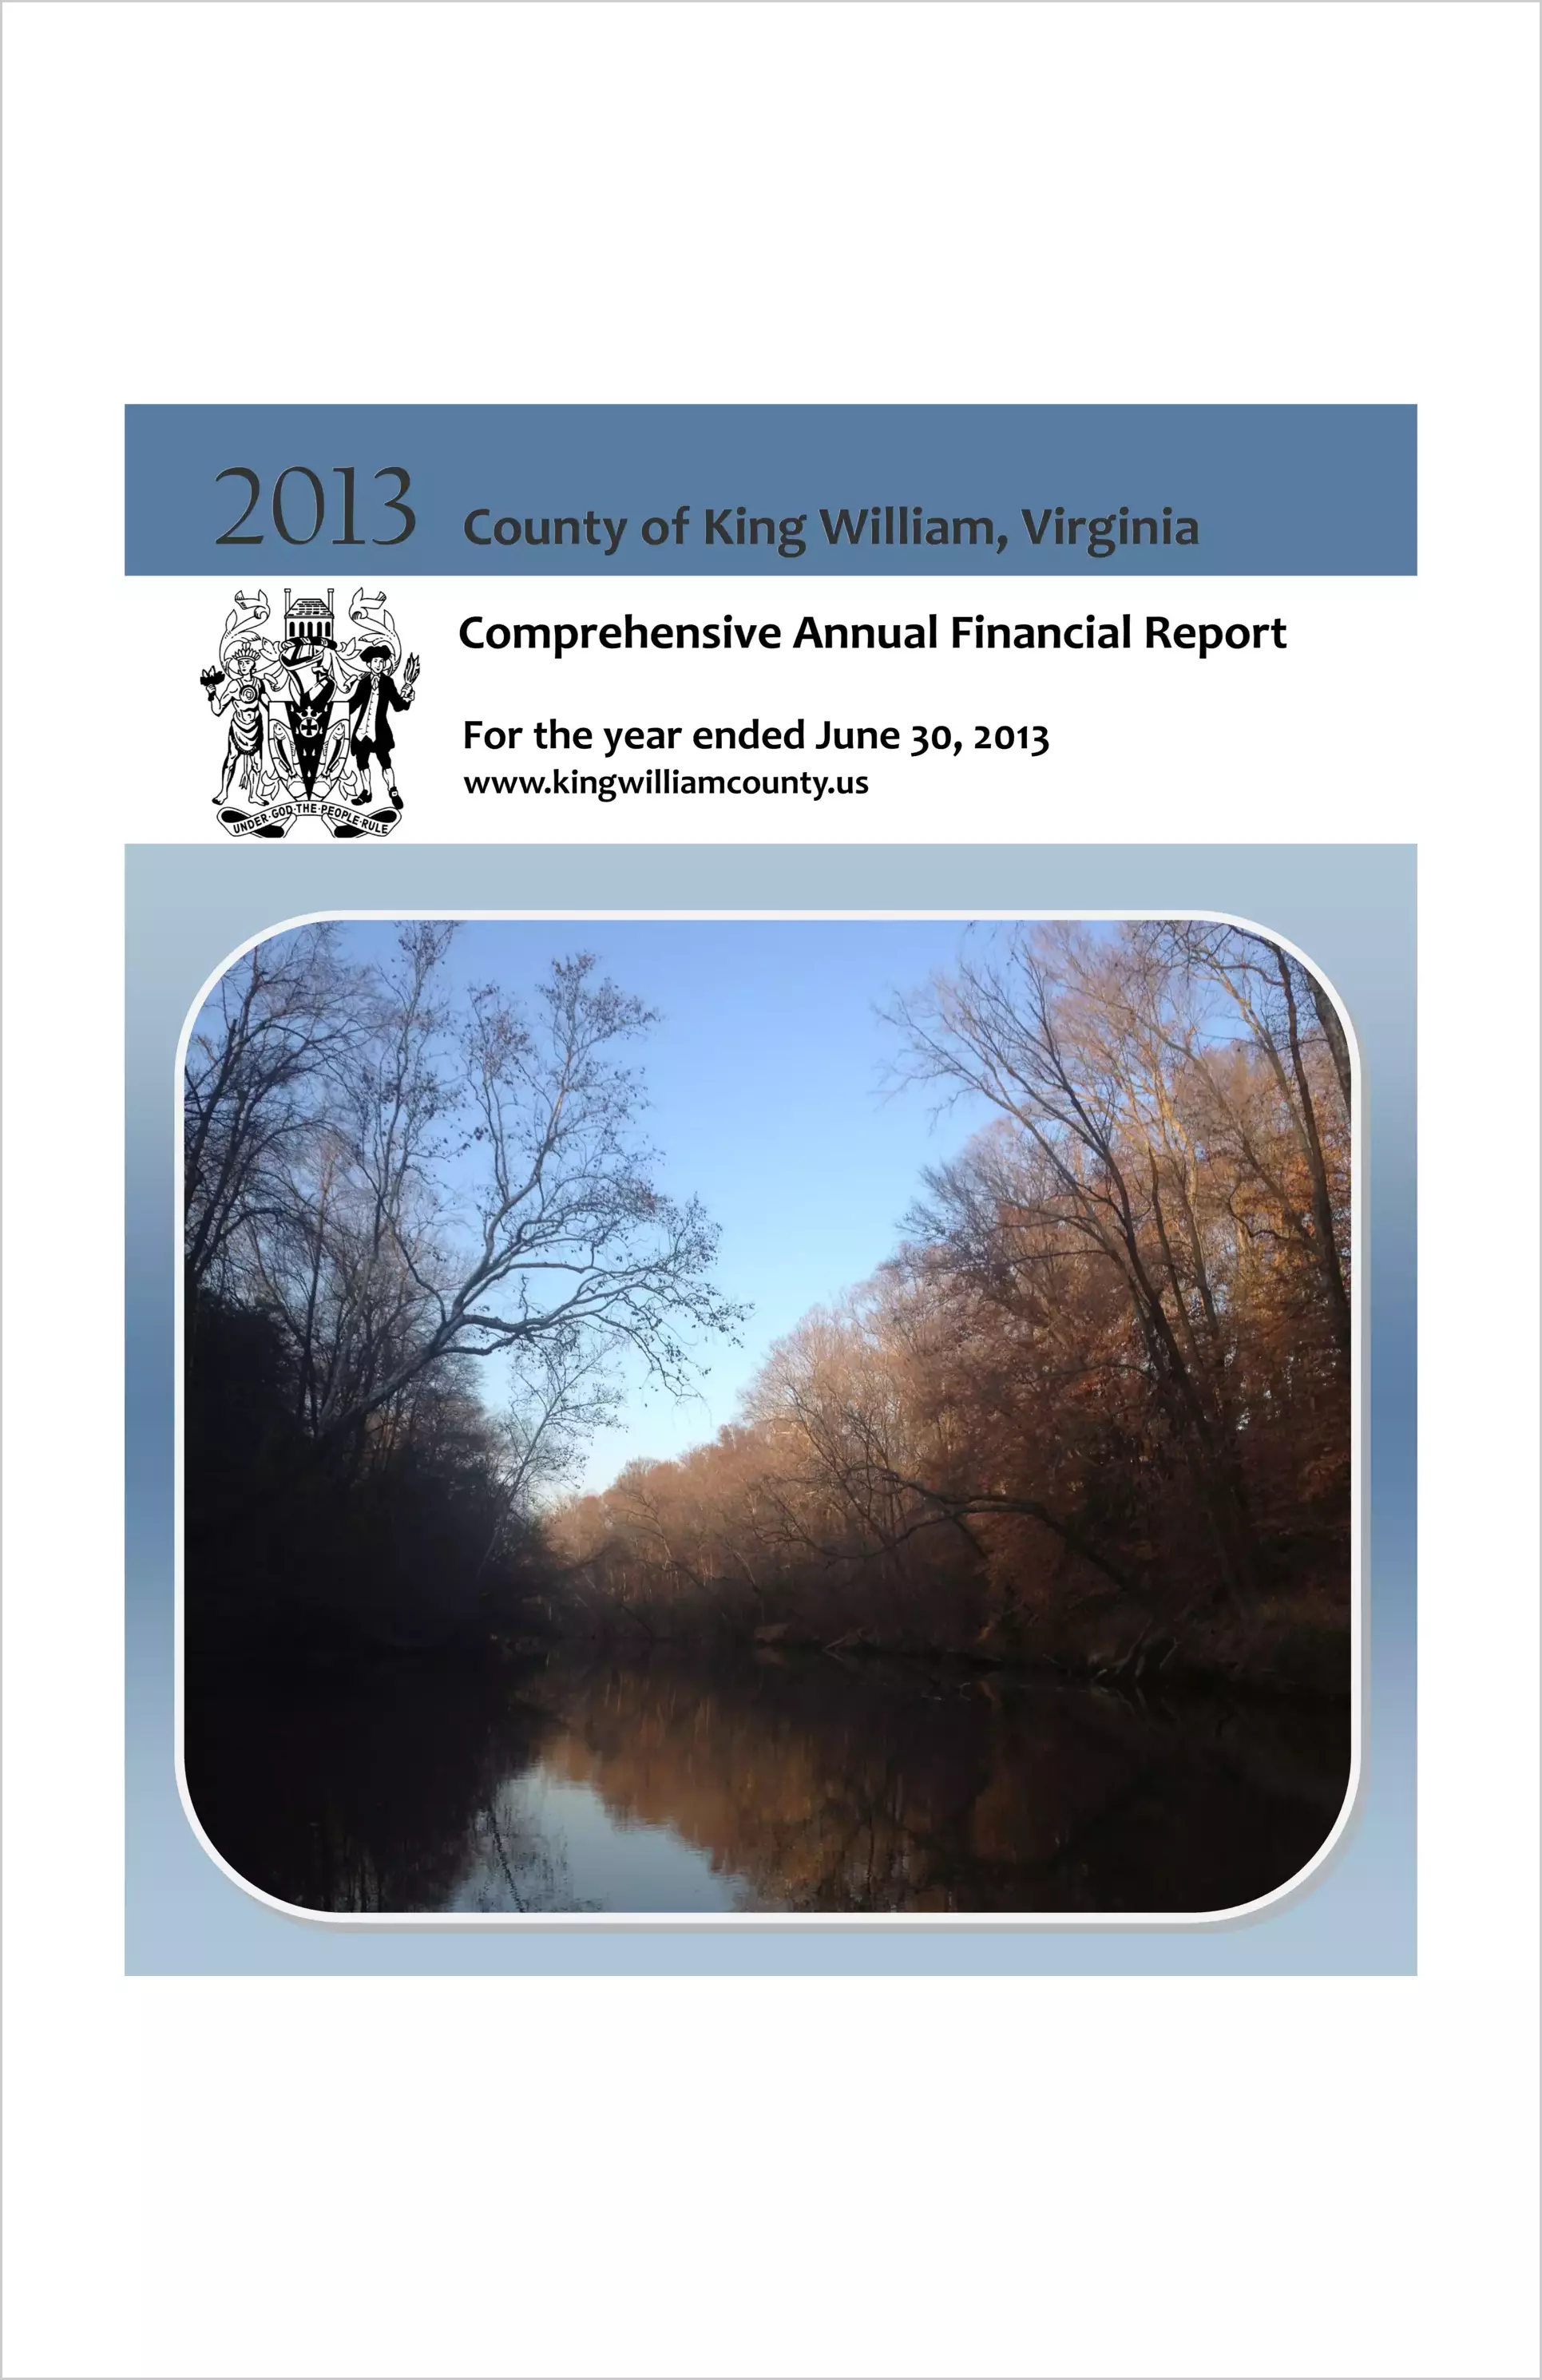 2013 Annual Financial Report for County of King William